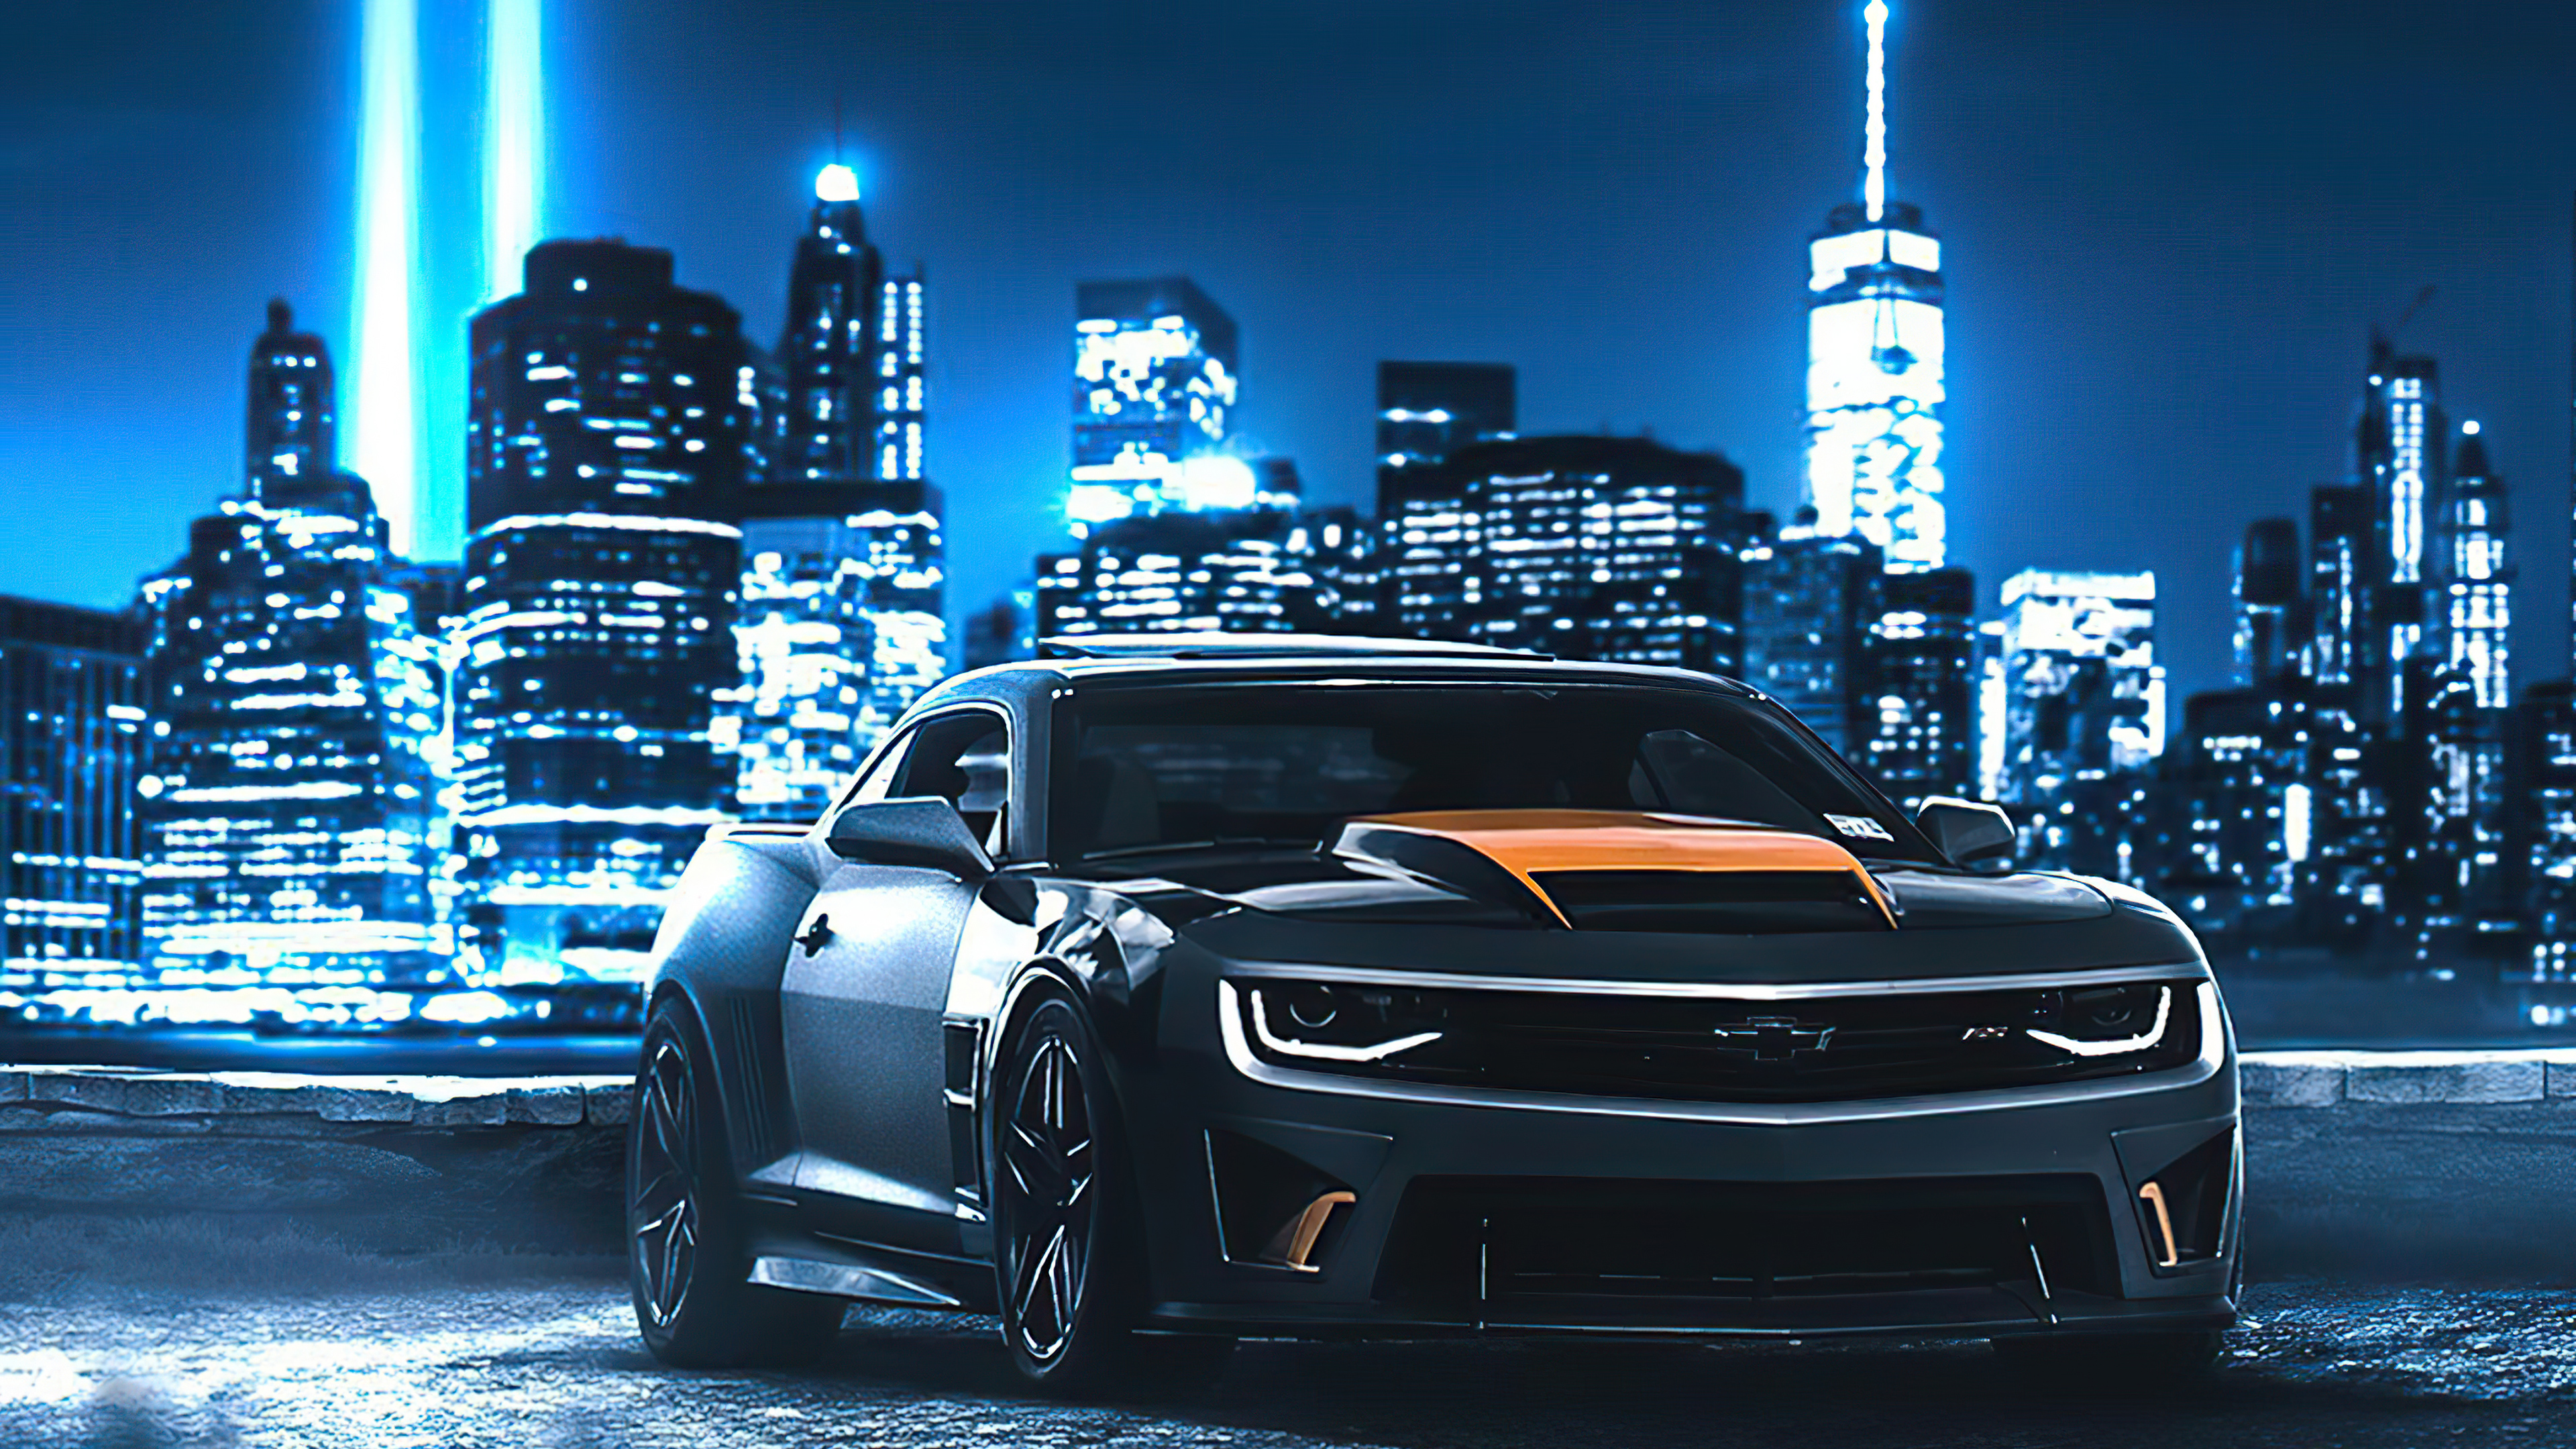 Camaro In Neon City 4k, HD Cars, 4k Wallpapers, Images, Backgrounds